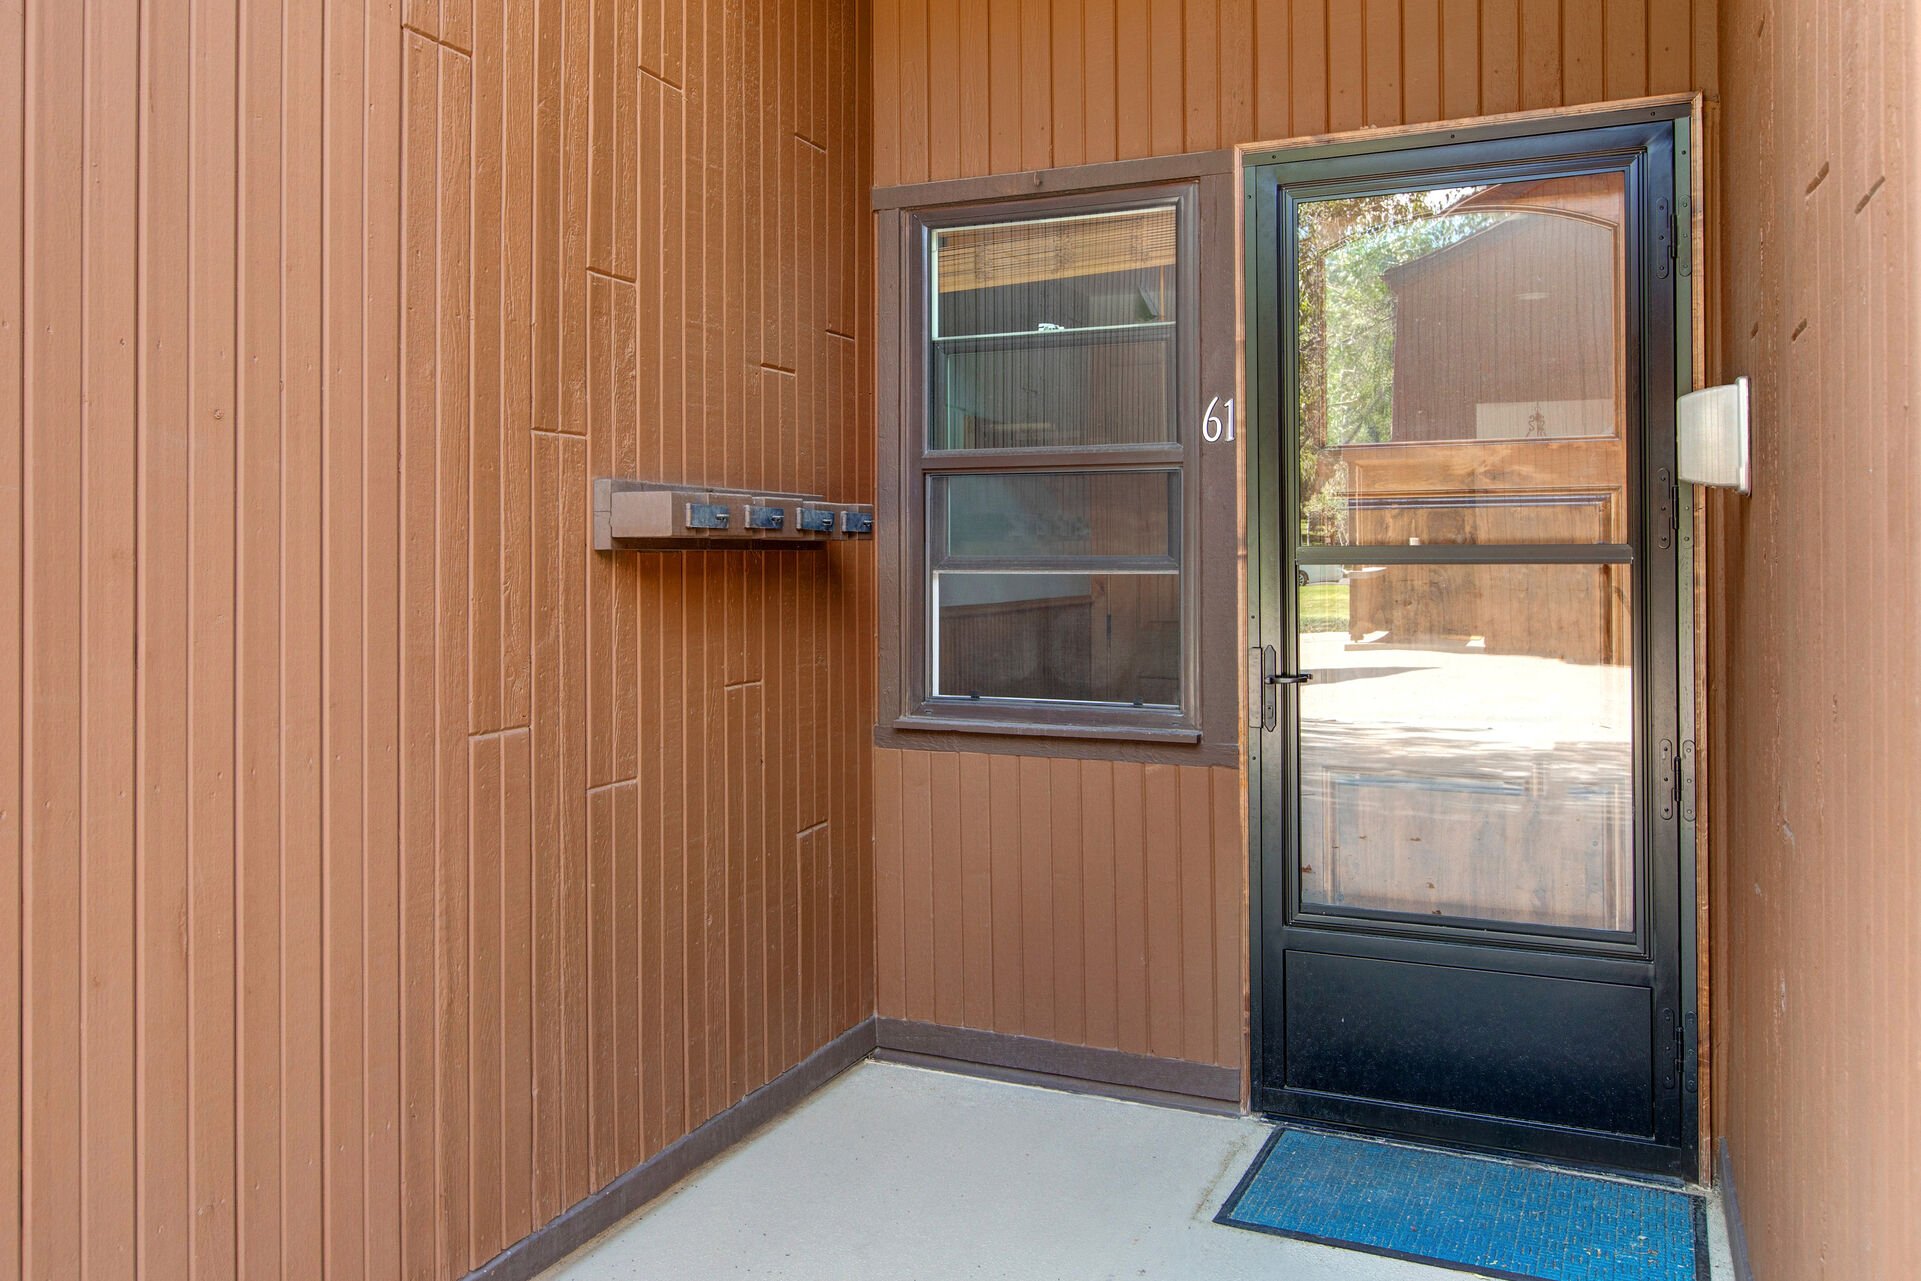 Front Door with Four Spaces for Locked Ski-Storage